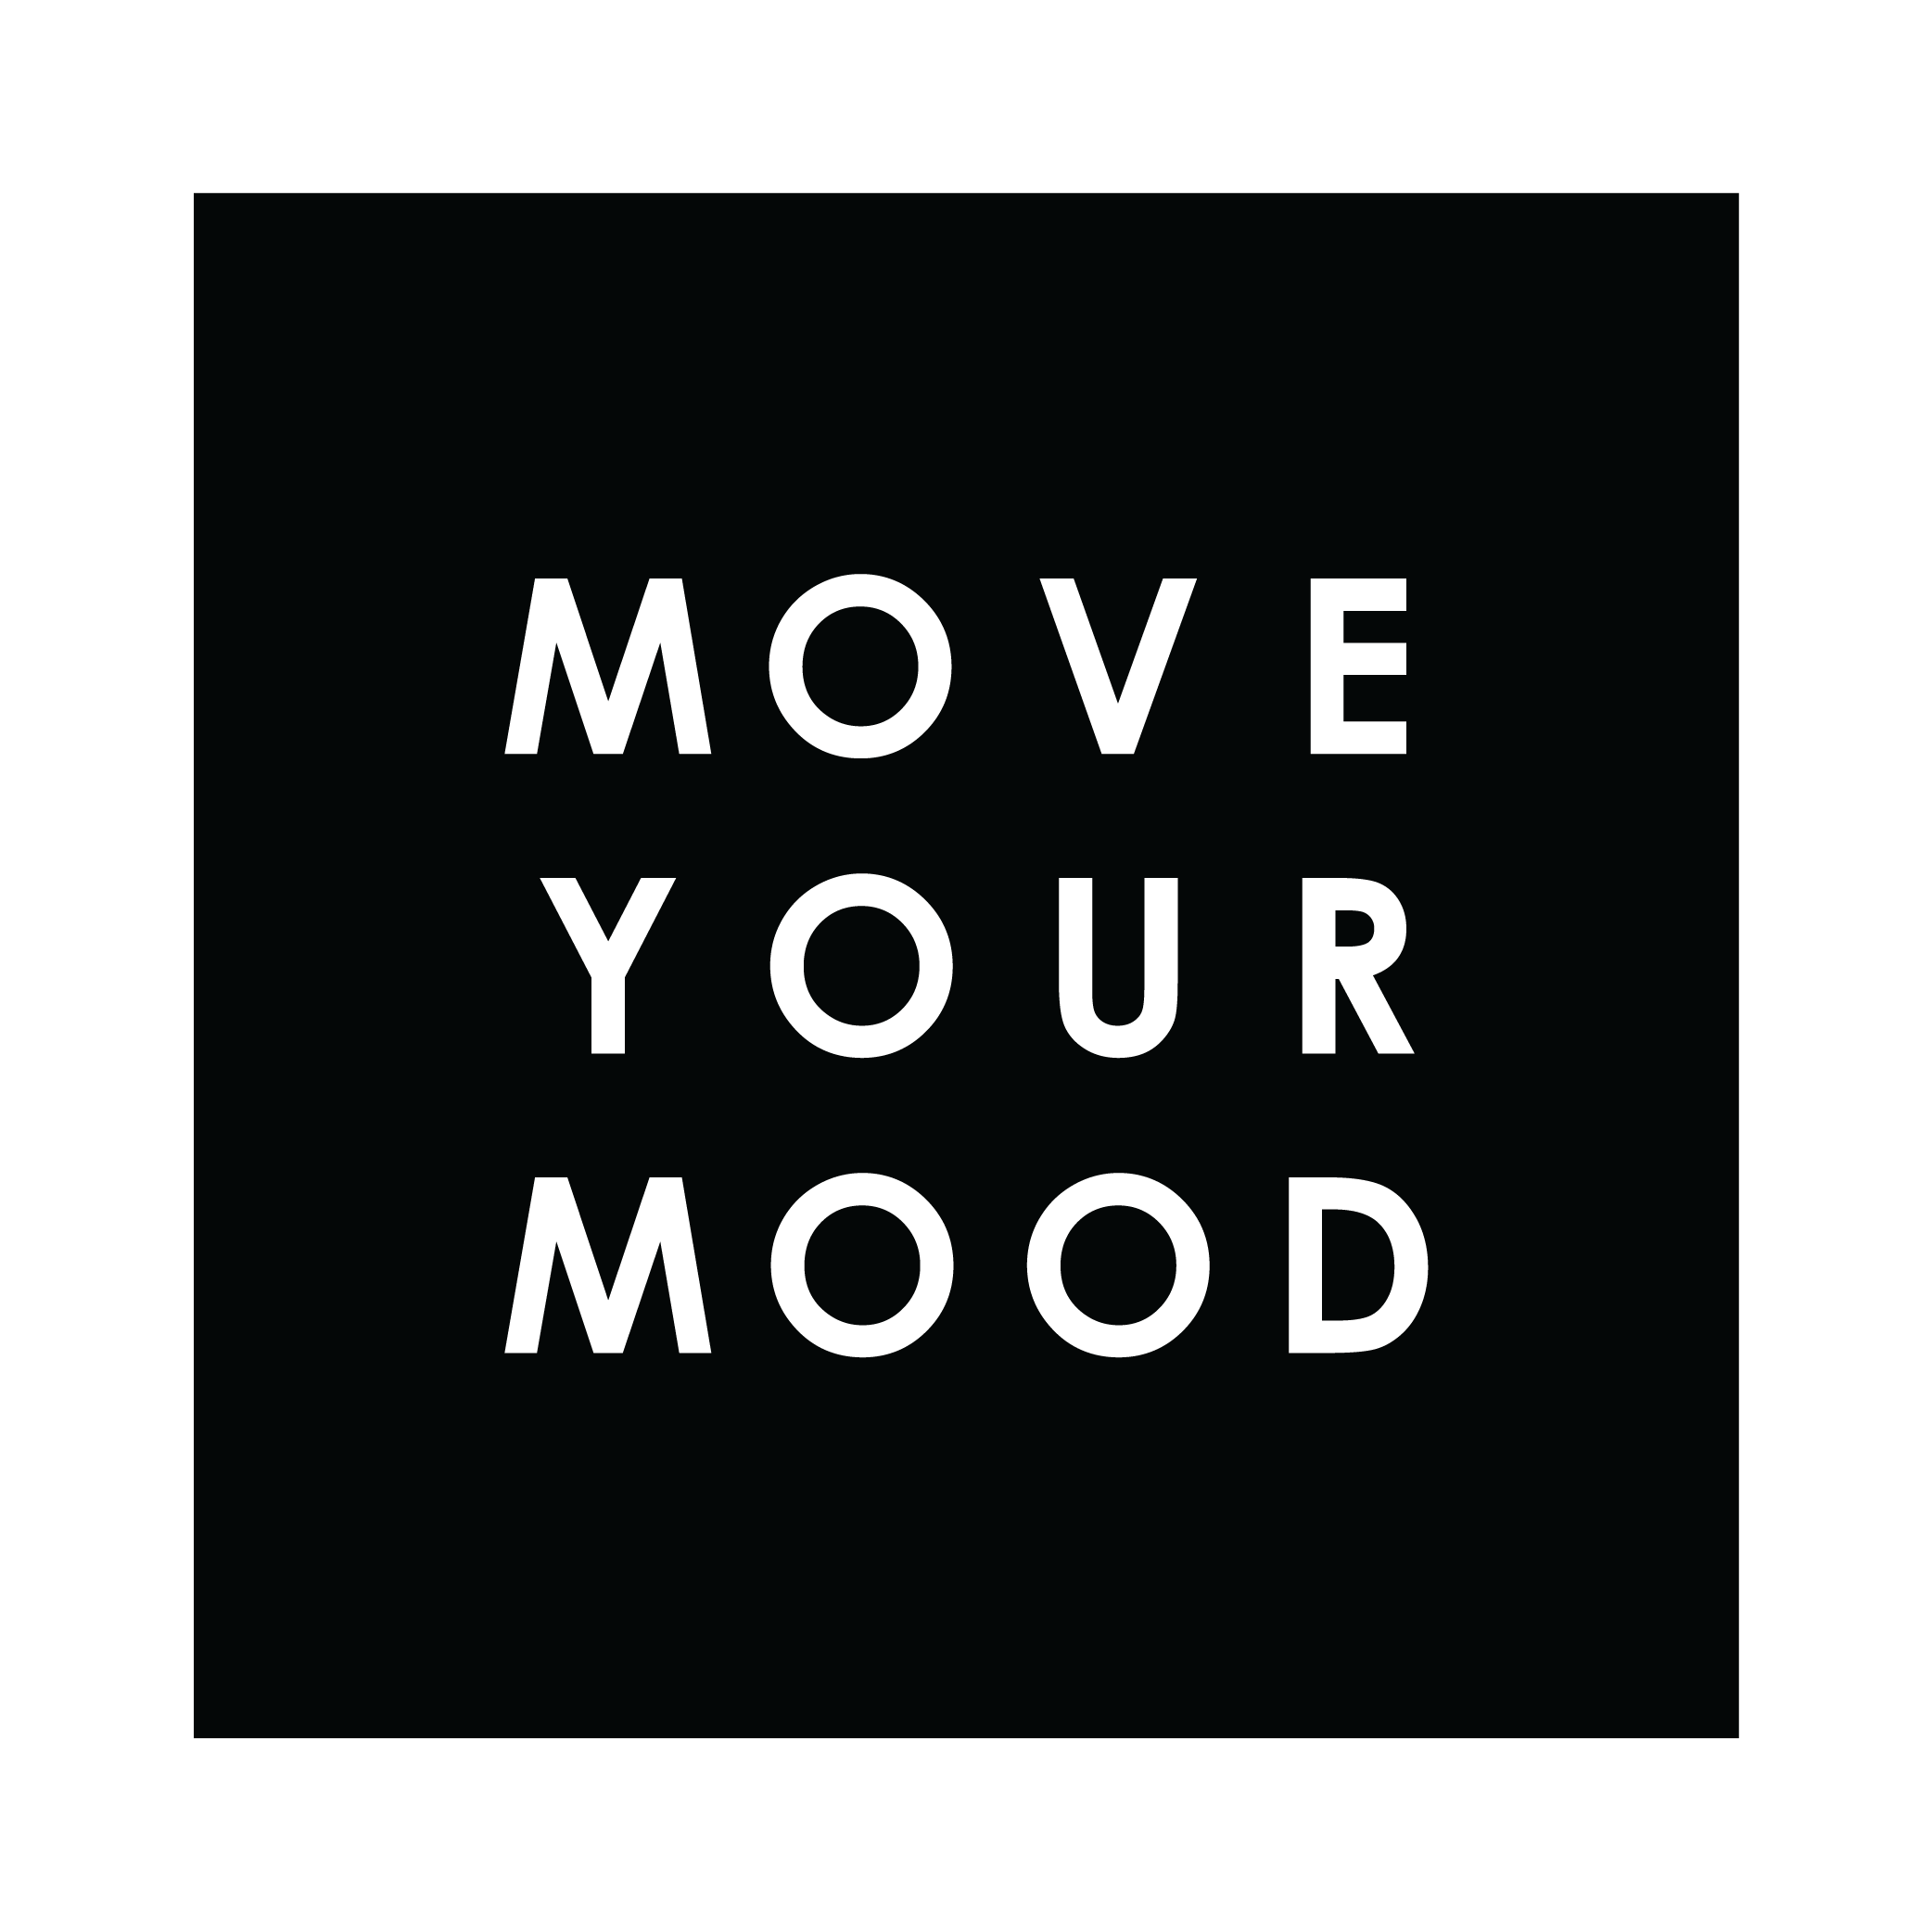 graphics_moveyourmood_patch_black_rgb.PNG